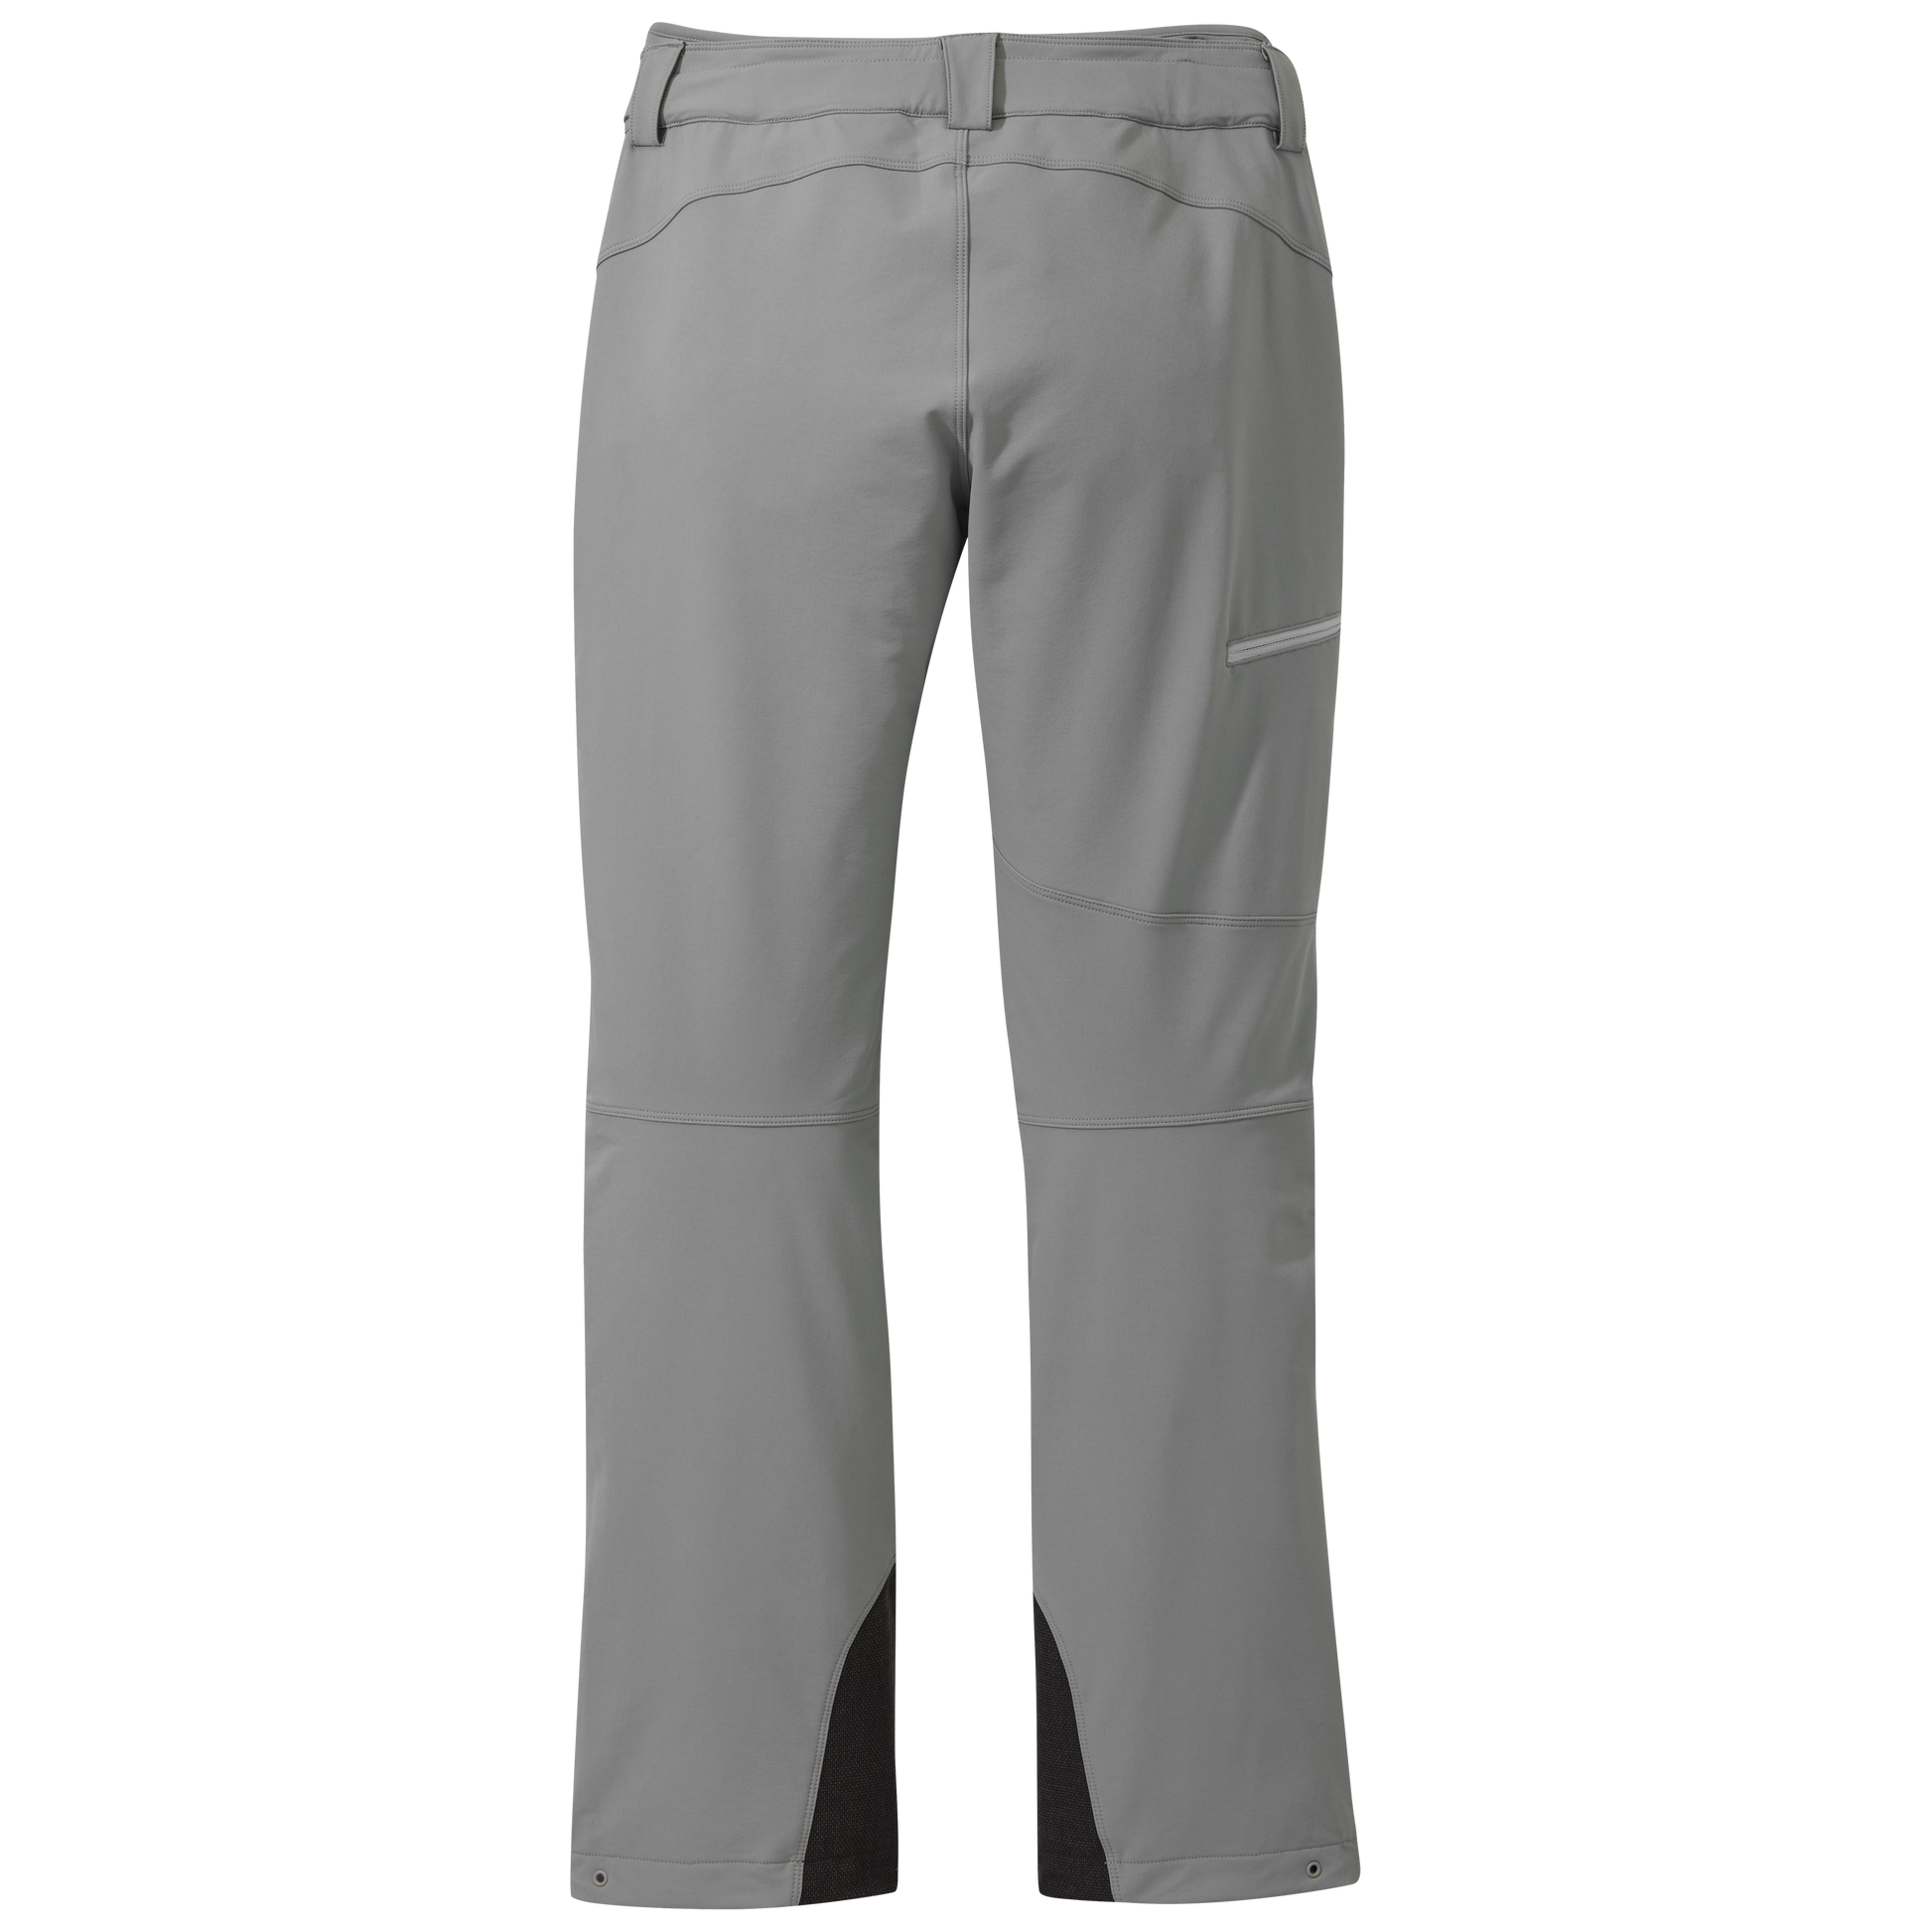 32 Degrees Cool Women's Weatherproof Jogger Pants - Size: Small